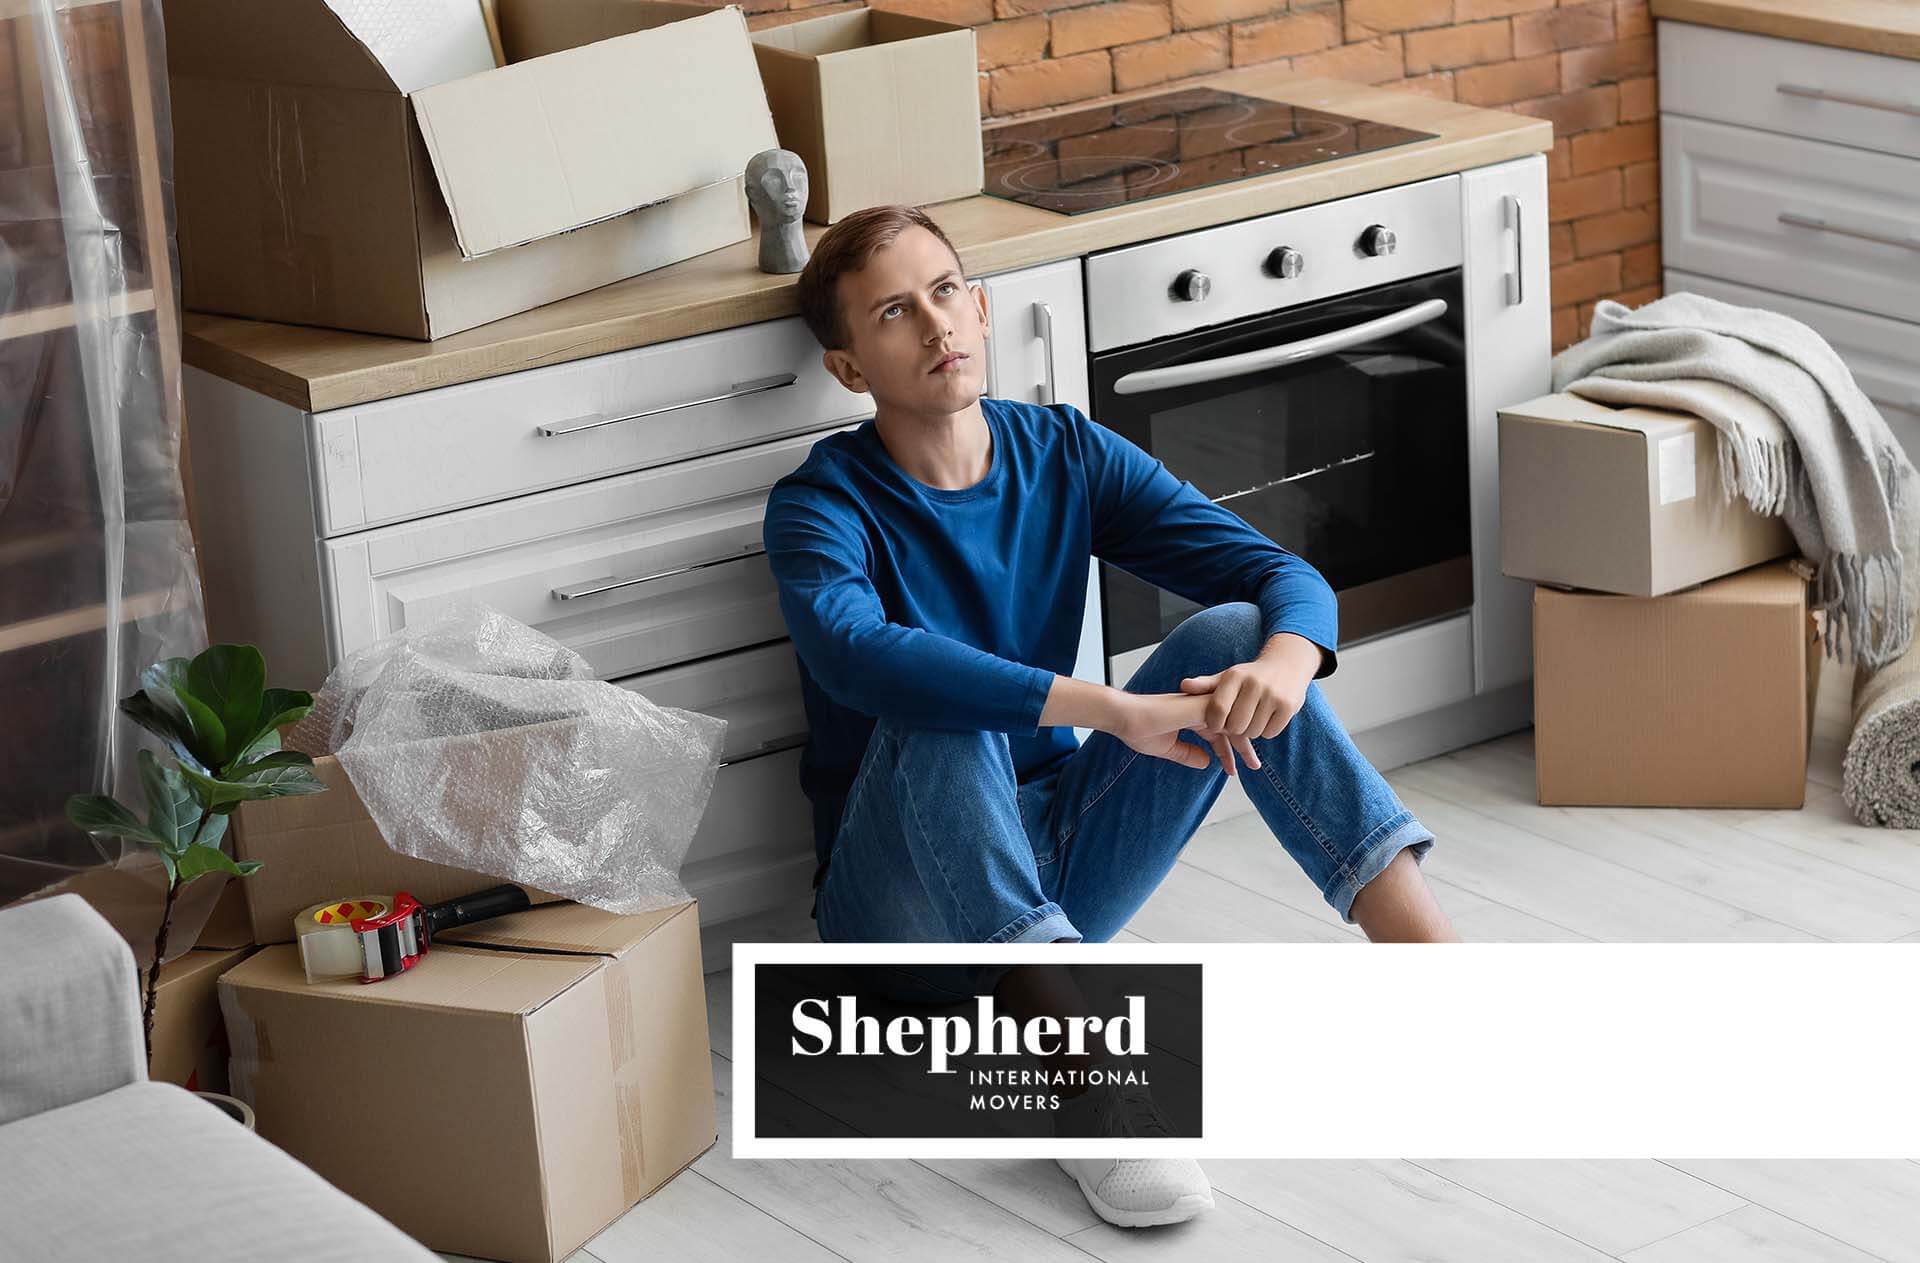 A man experiences depression after moving without Shepherd International Movers